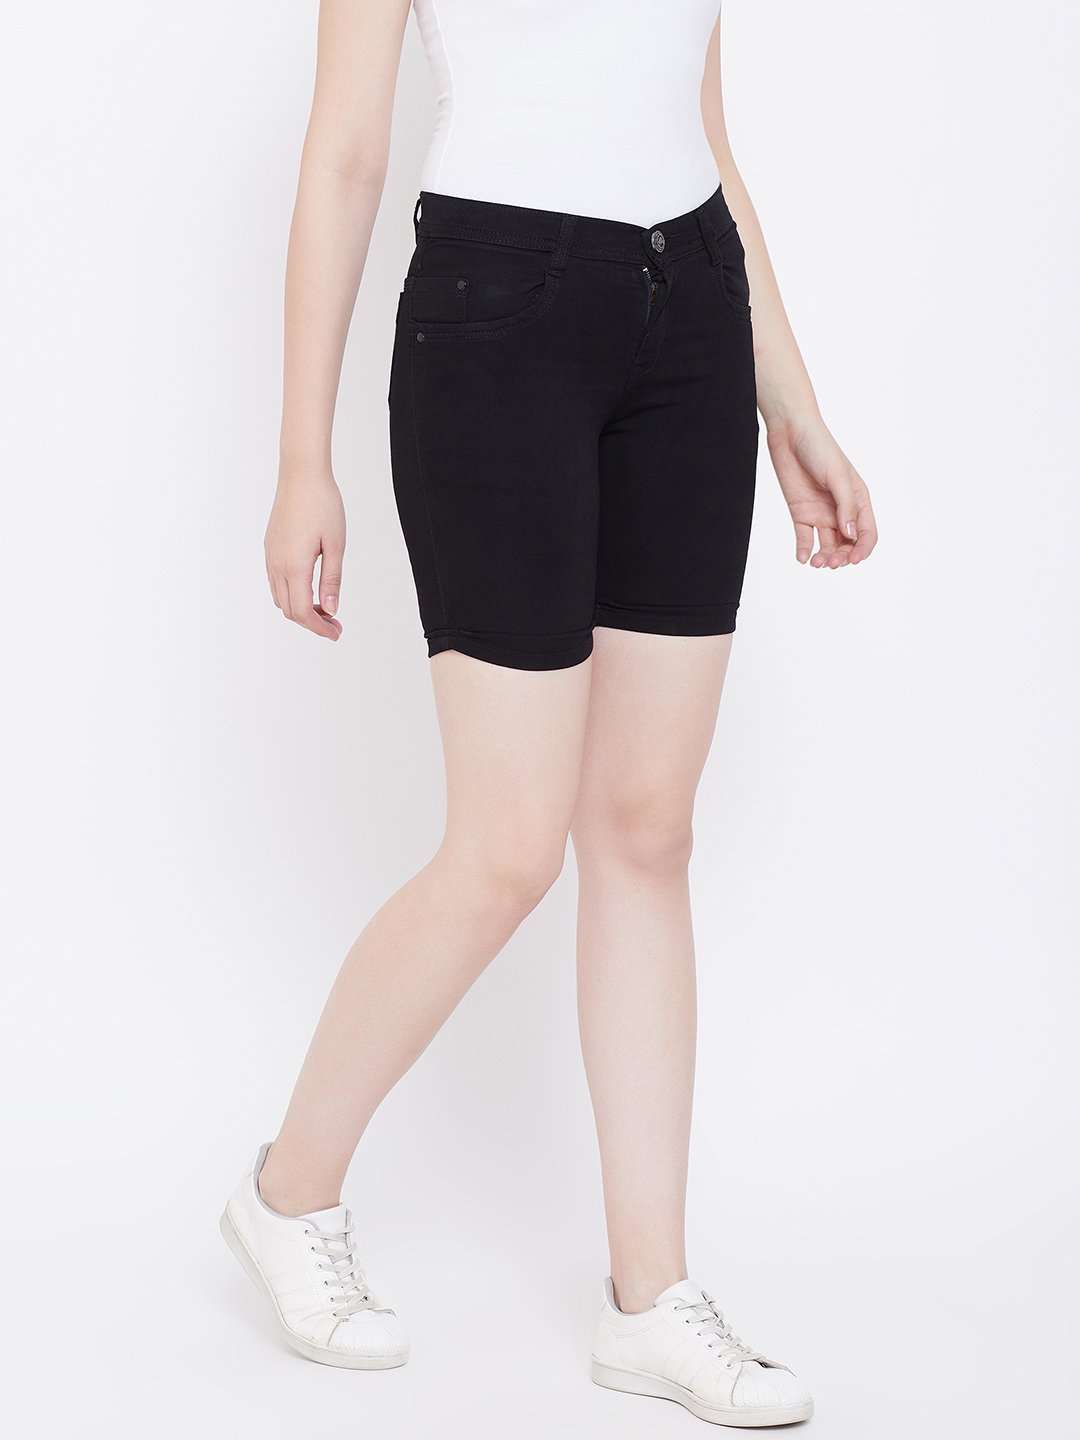 Slim Fit Stretchable Black Shorts - NiftyJeans